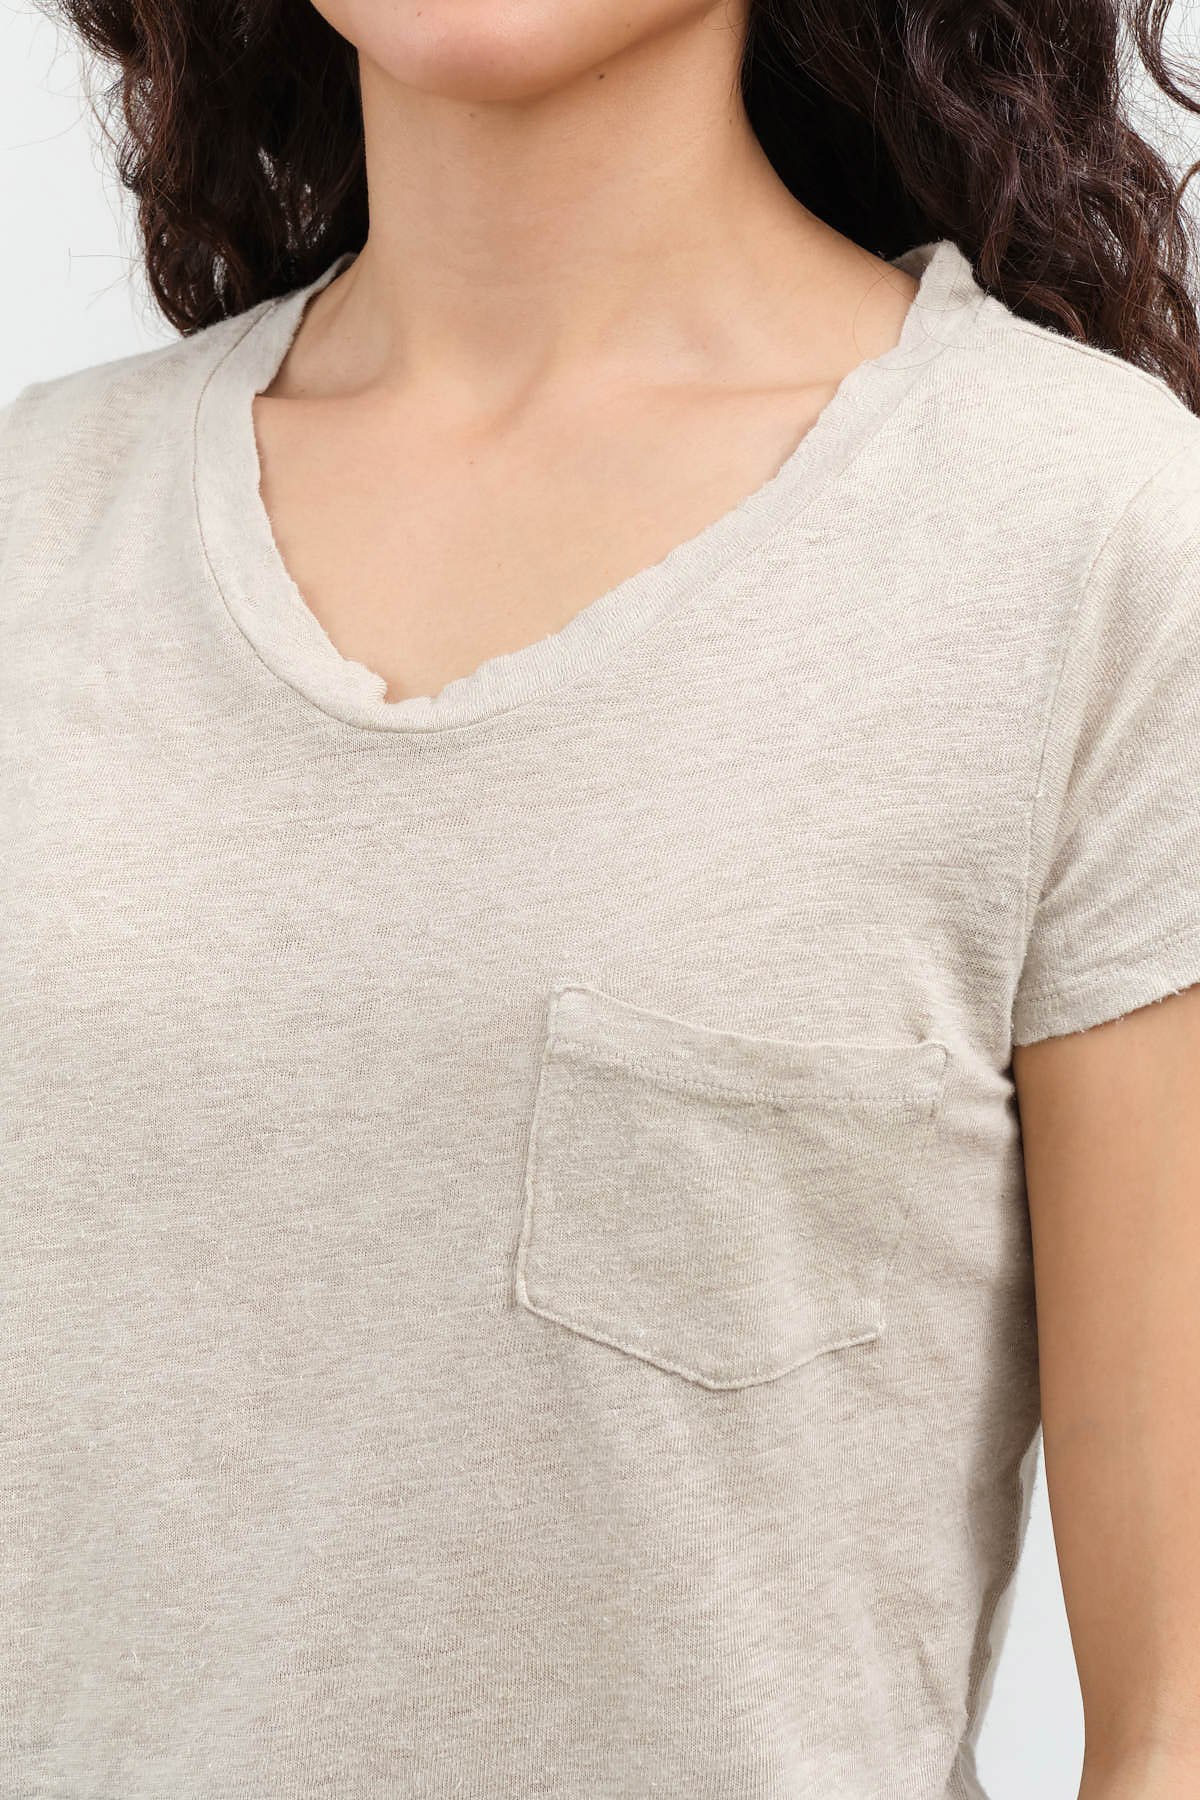 Collar view of Sweetness V-Neck Tee in Pumice